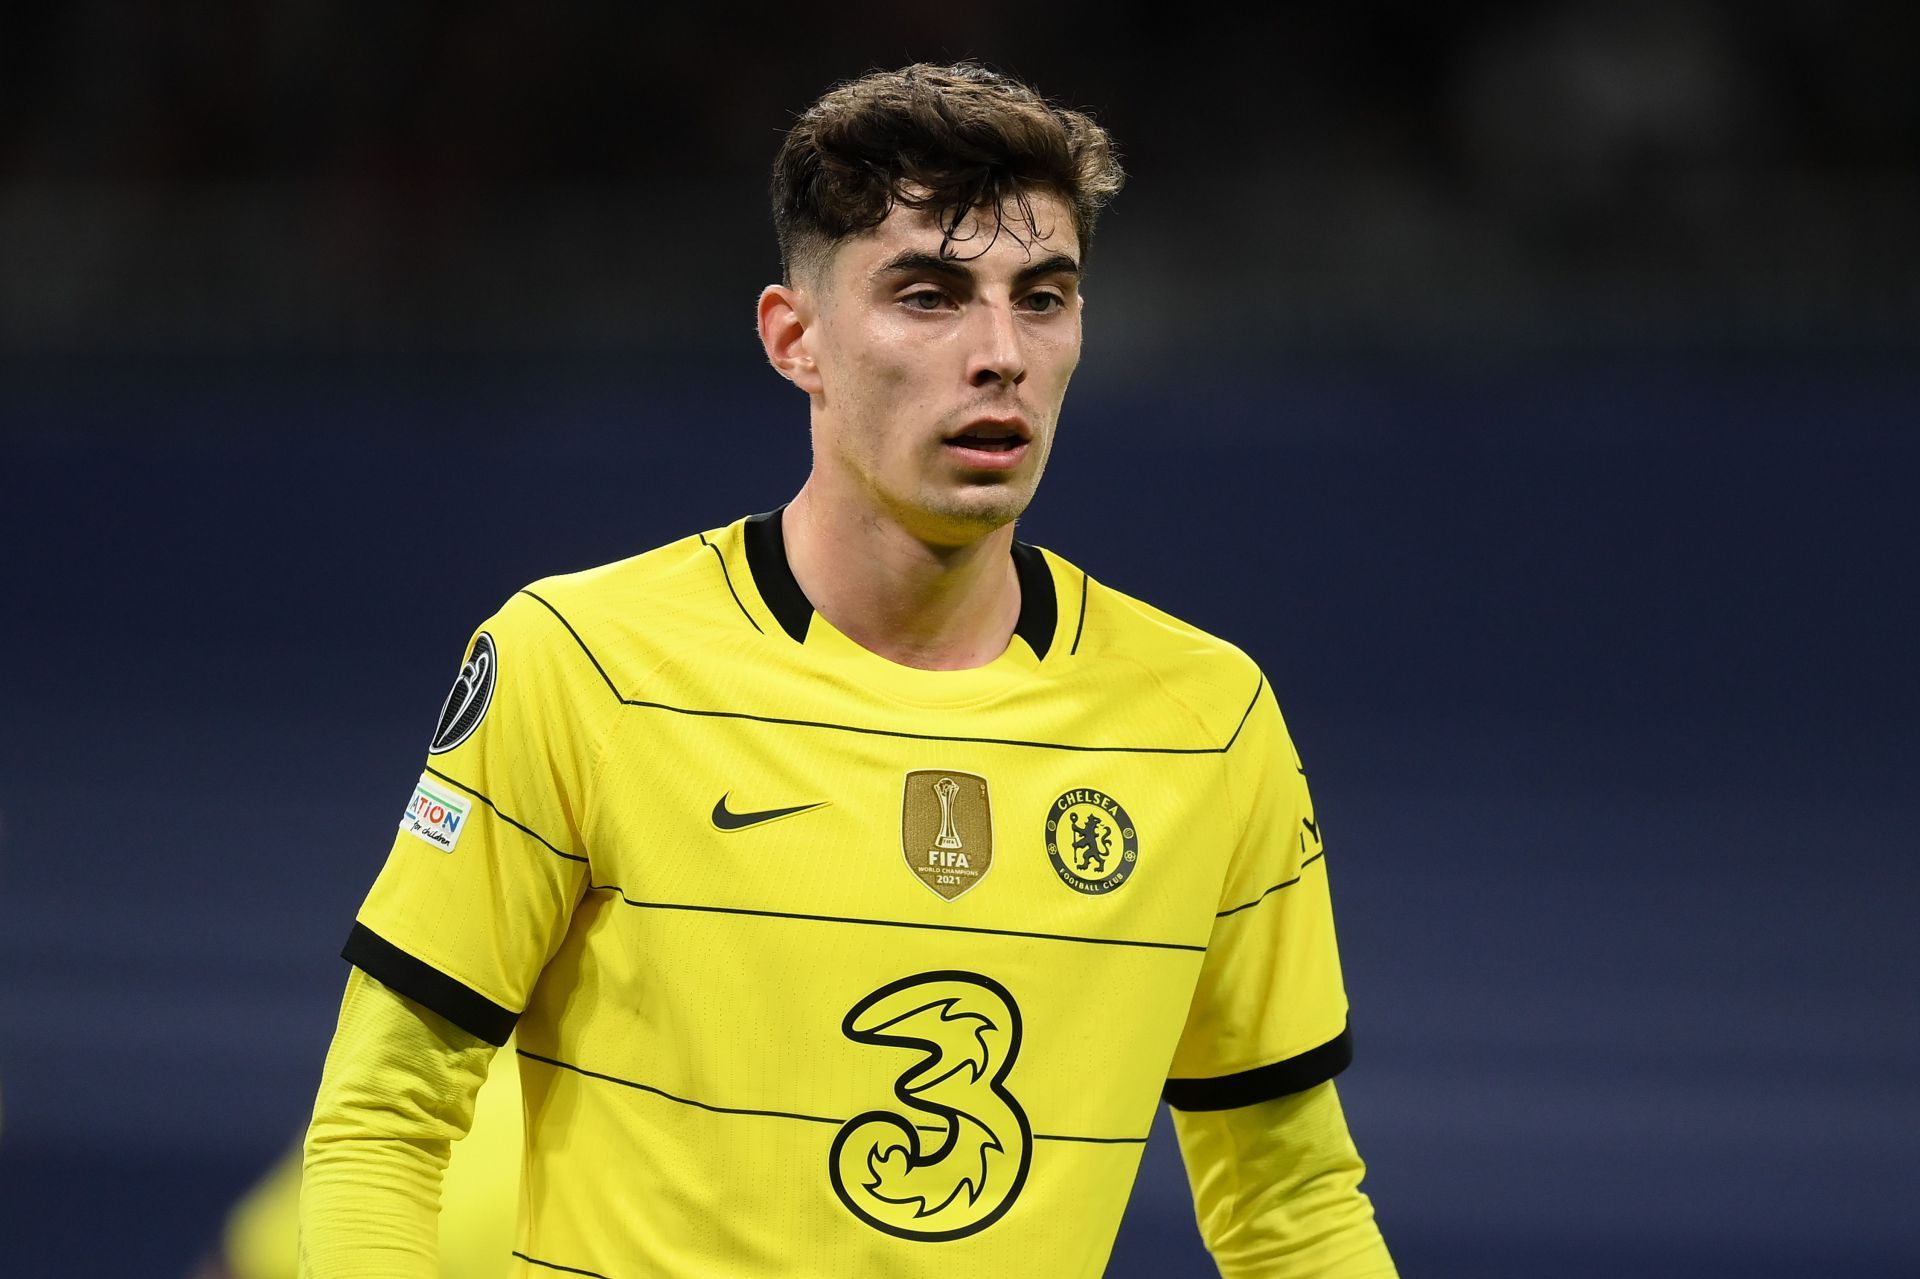 Havertz is one of the best young players in the world